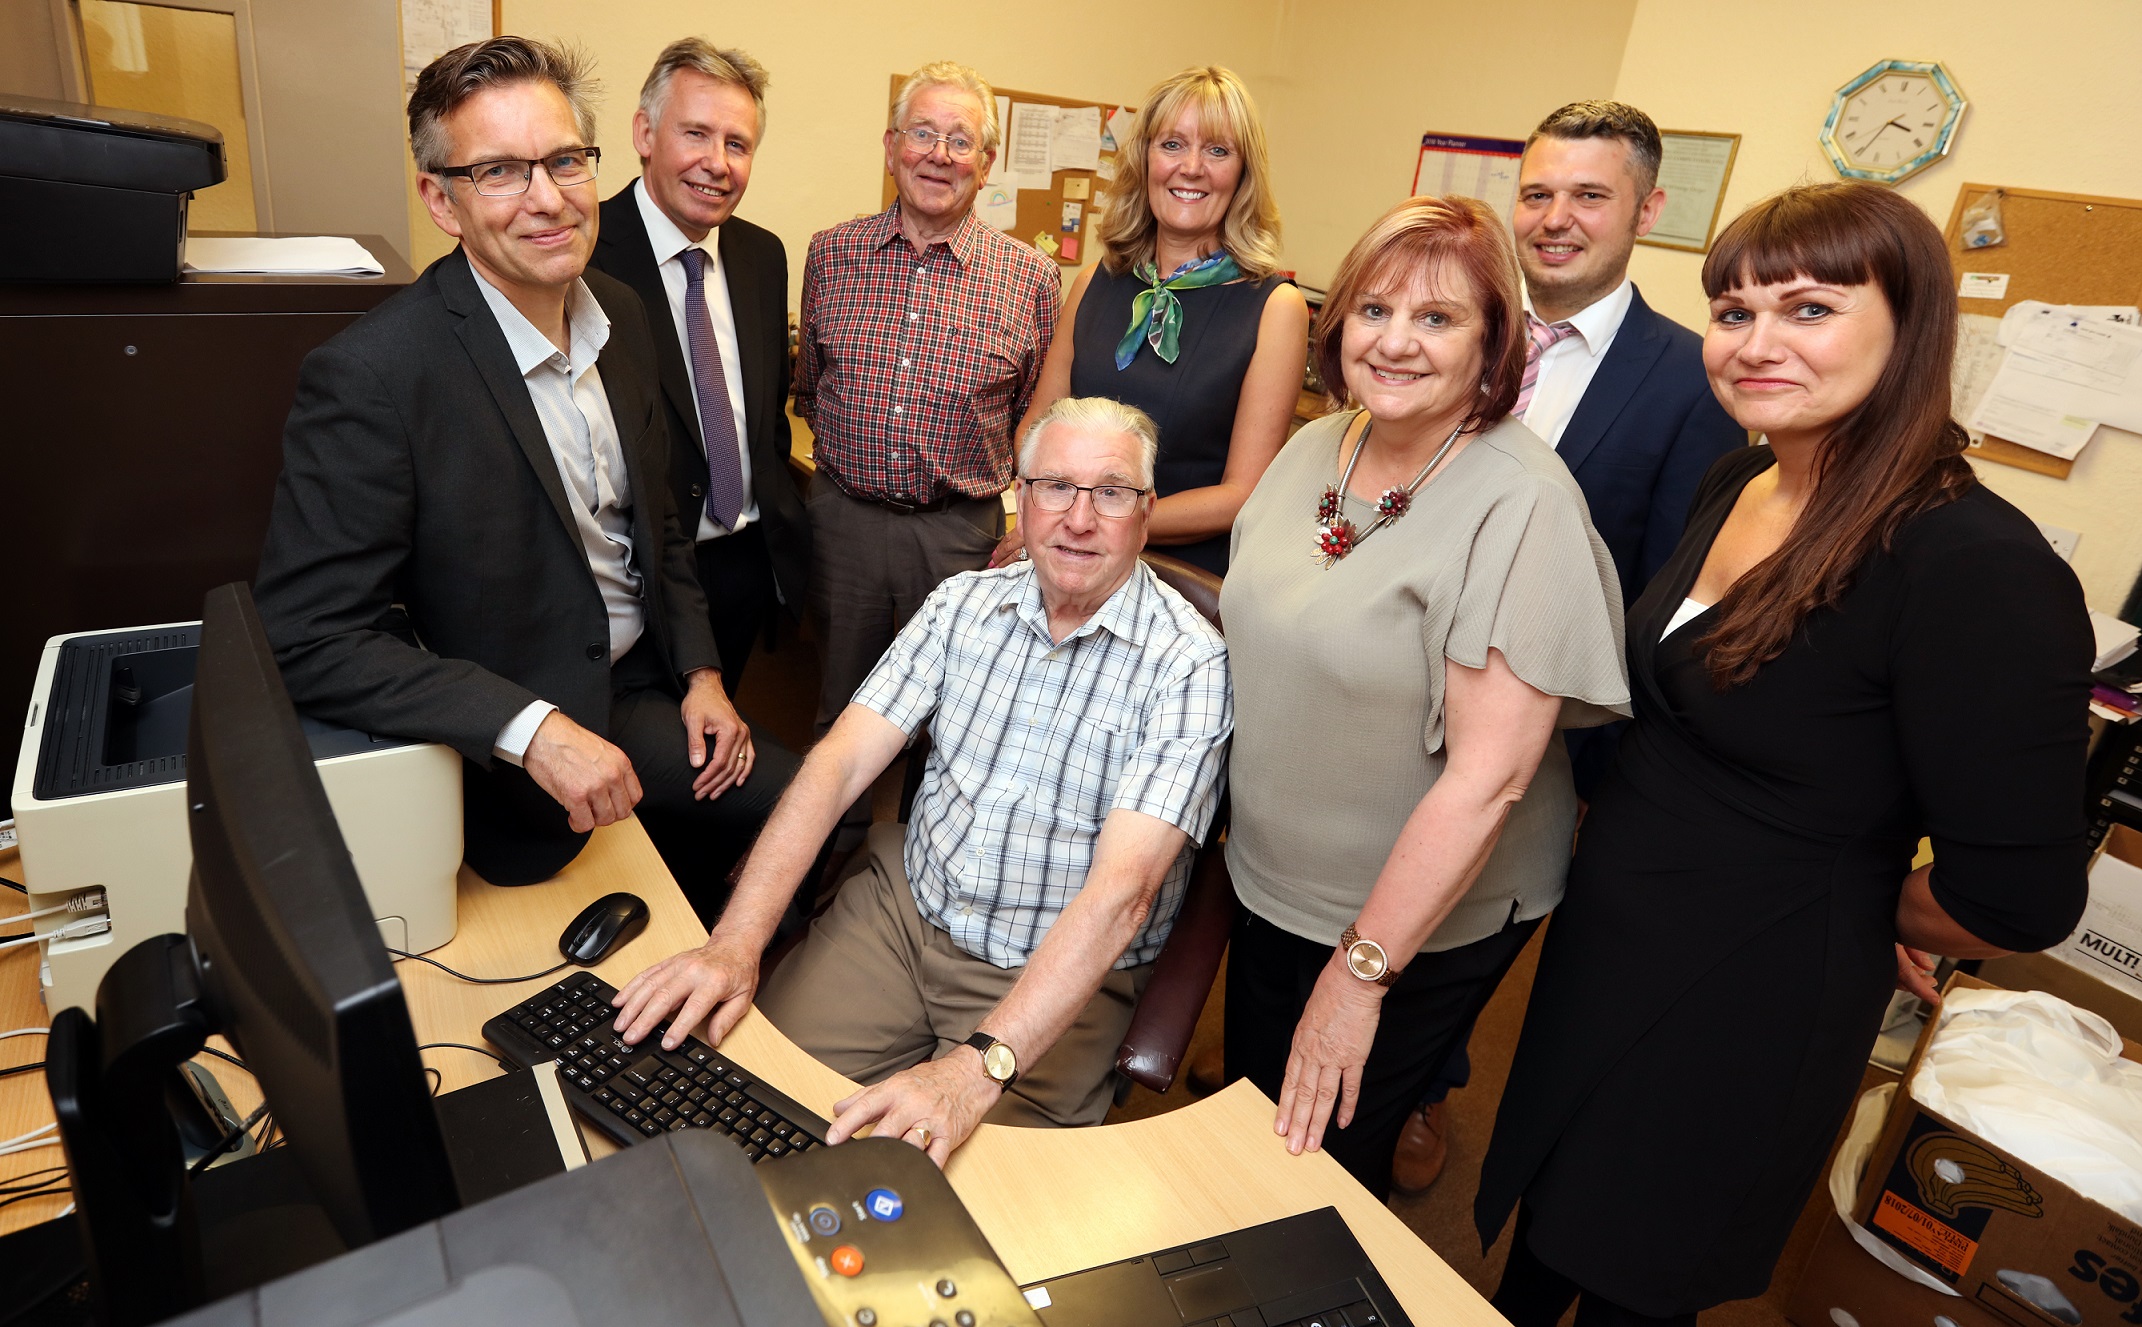 Low-cost Laptops & PCs Offered to Charities